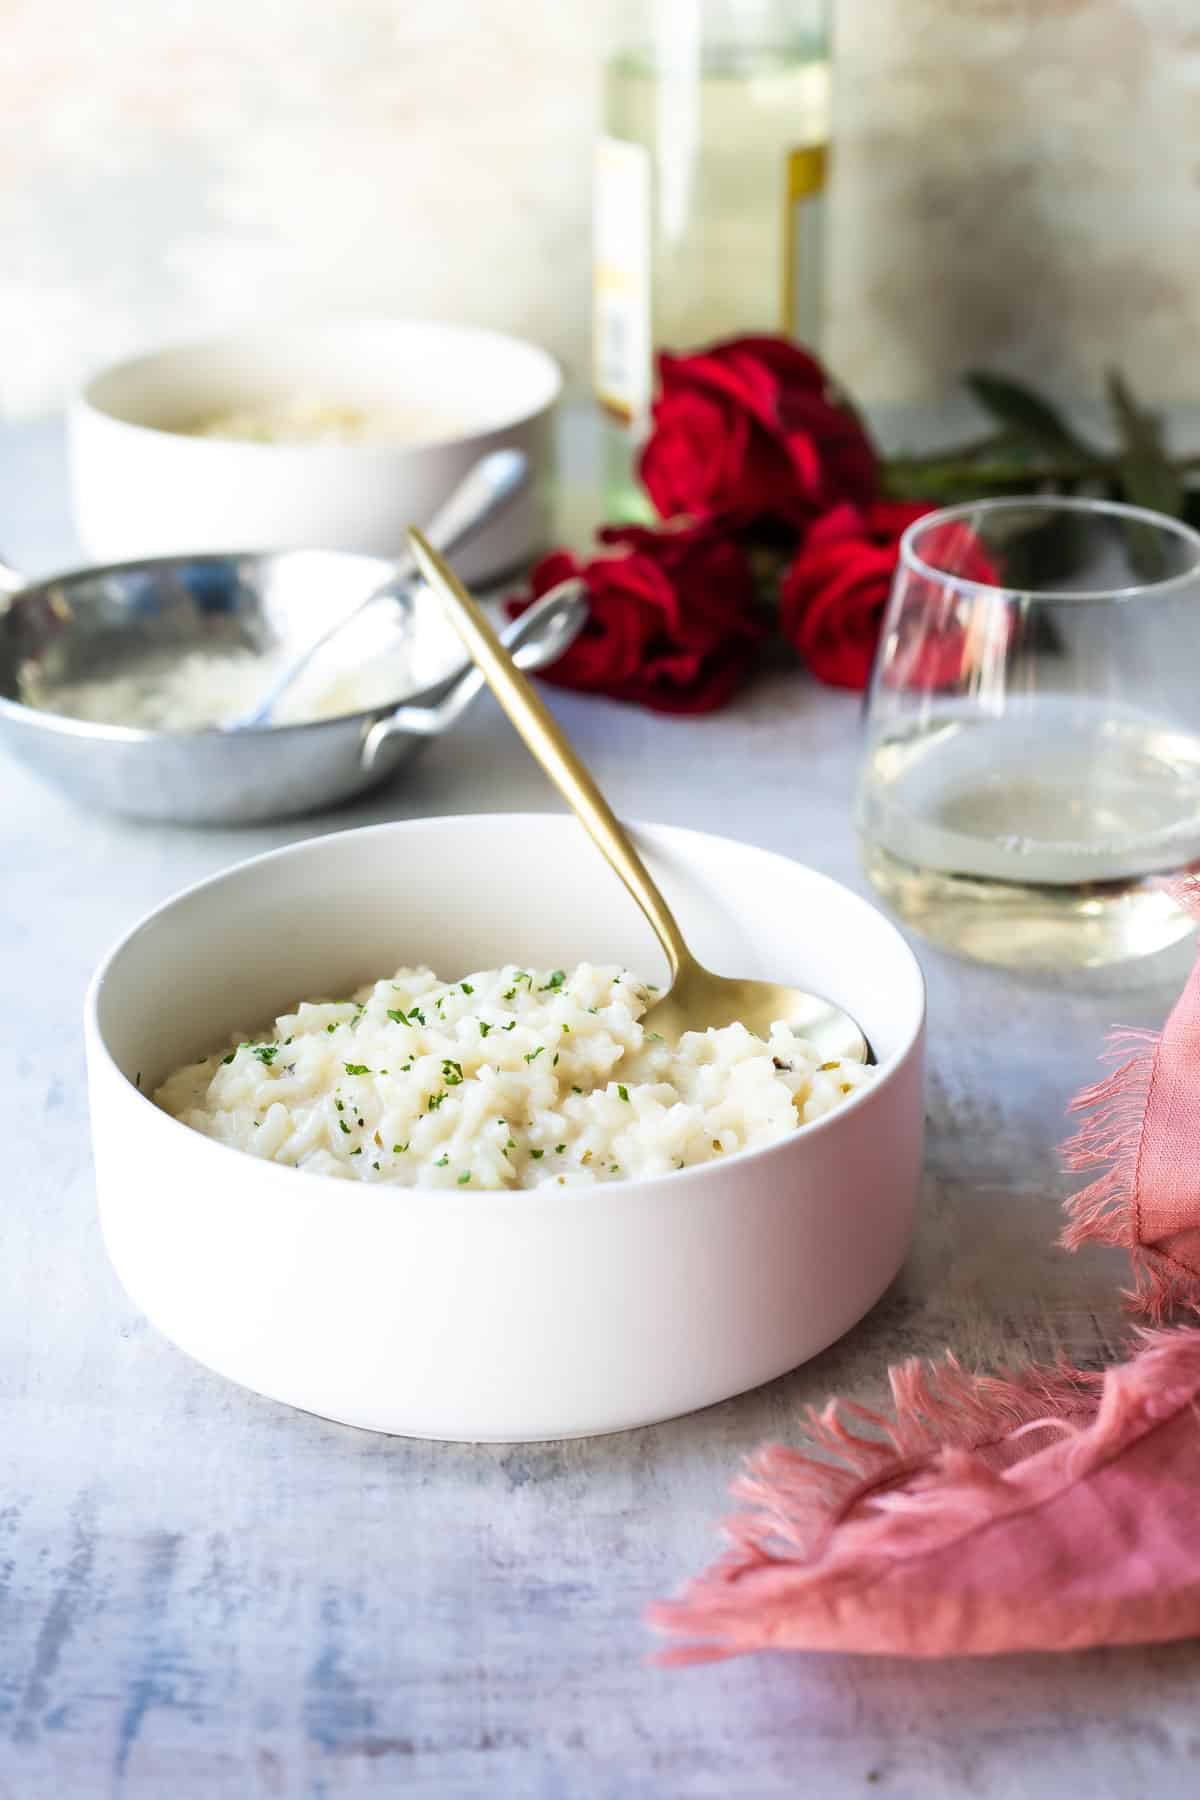 A bowl full of Risotto with red roses and white wine in the background.